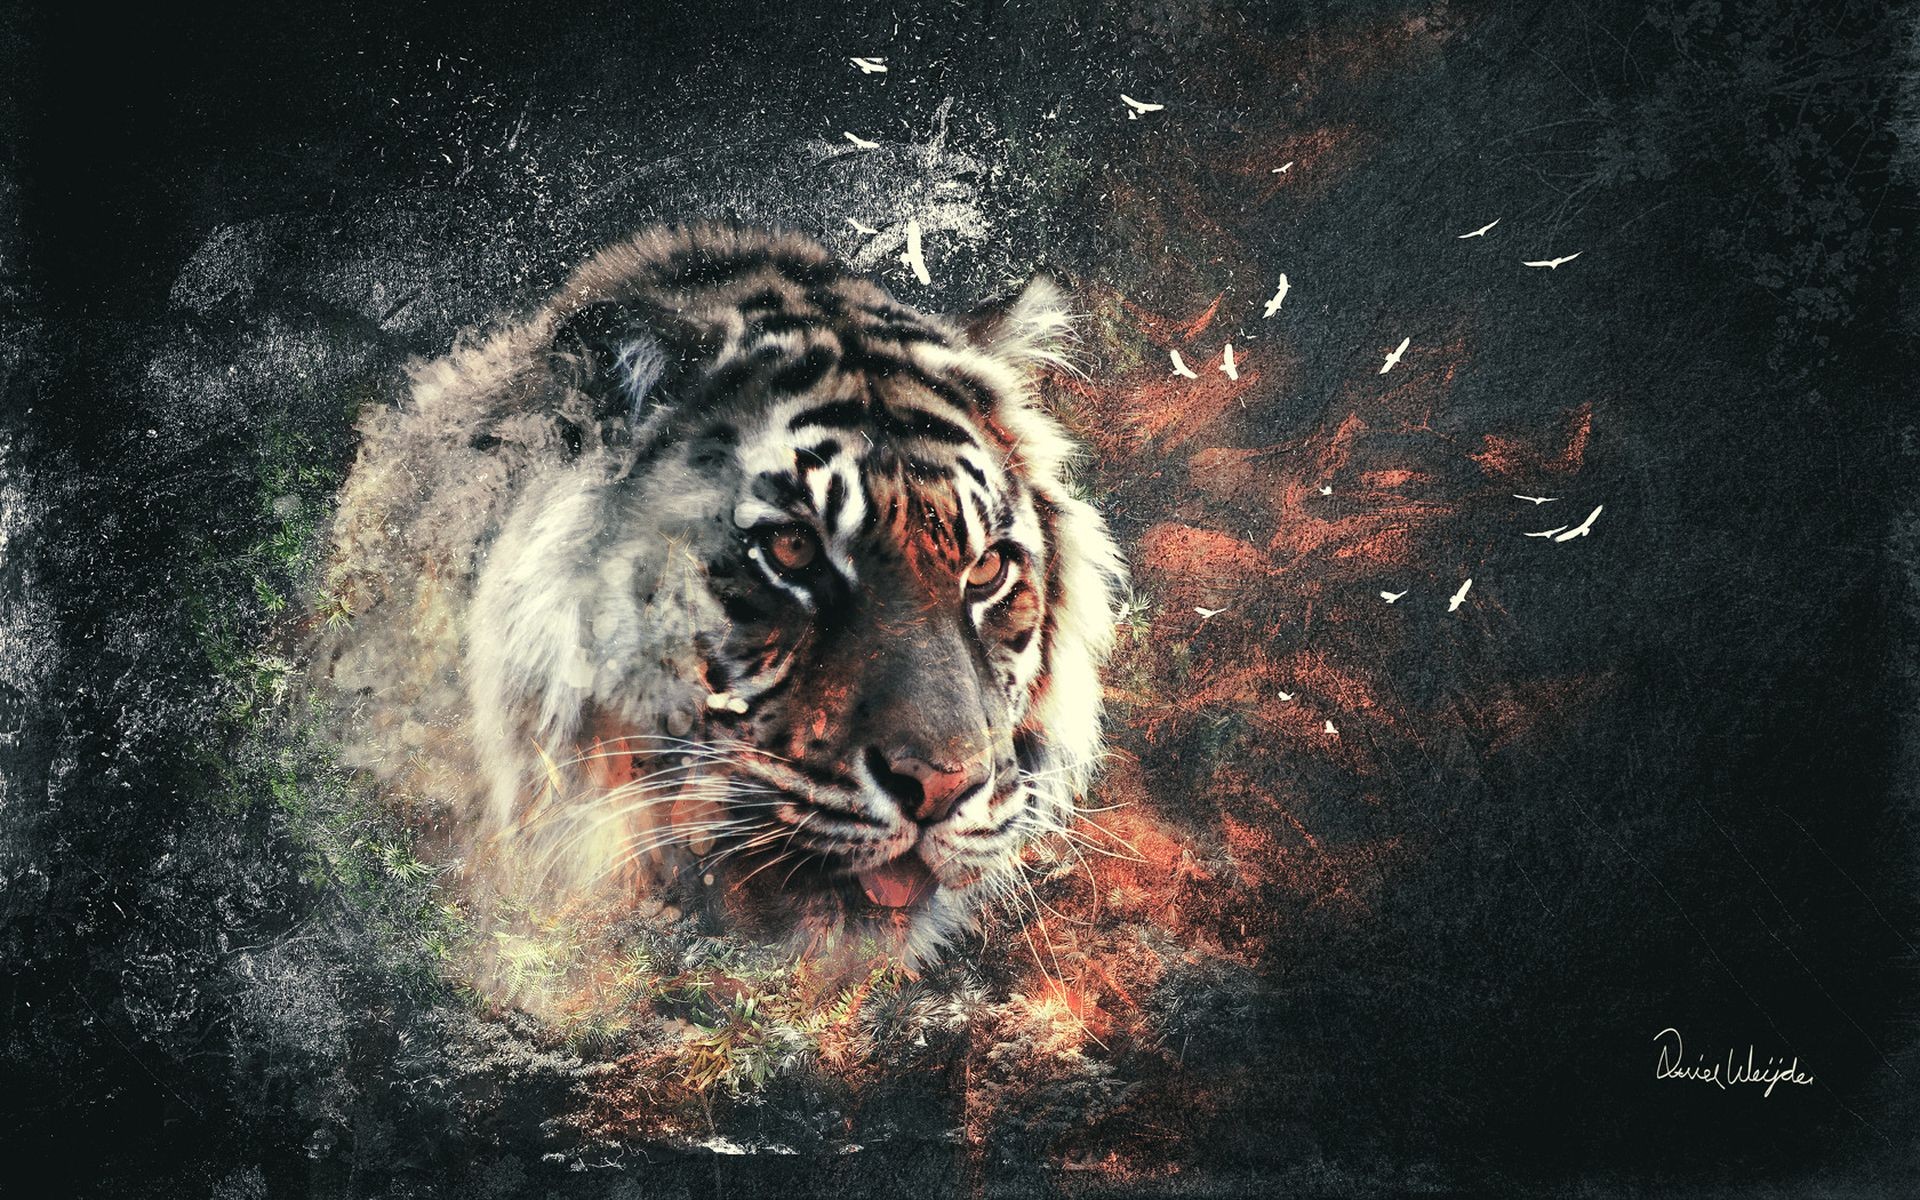 Tiger art Wallpaper hd background - Fresh HD Wallpapers - HiFi Papers